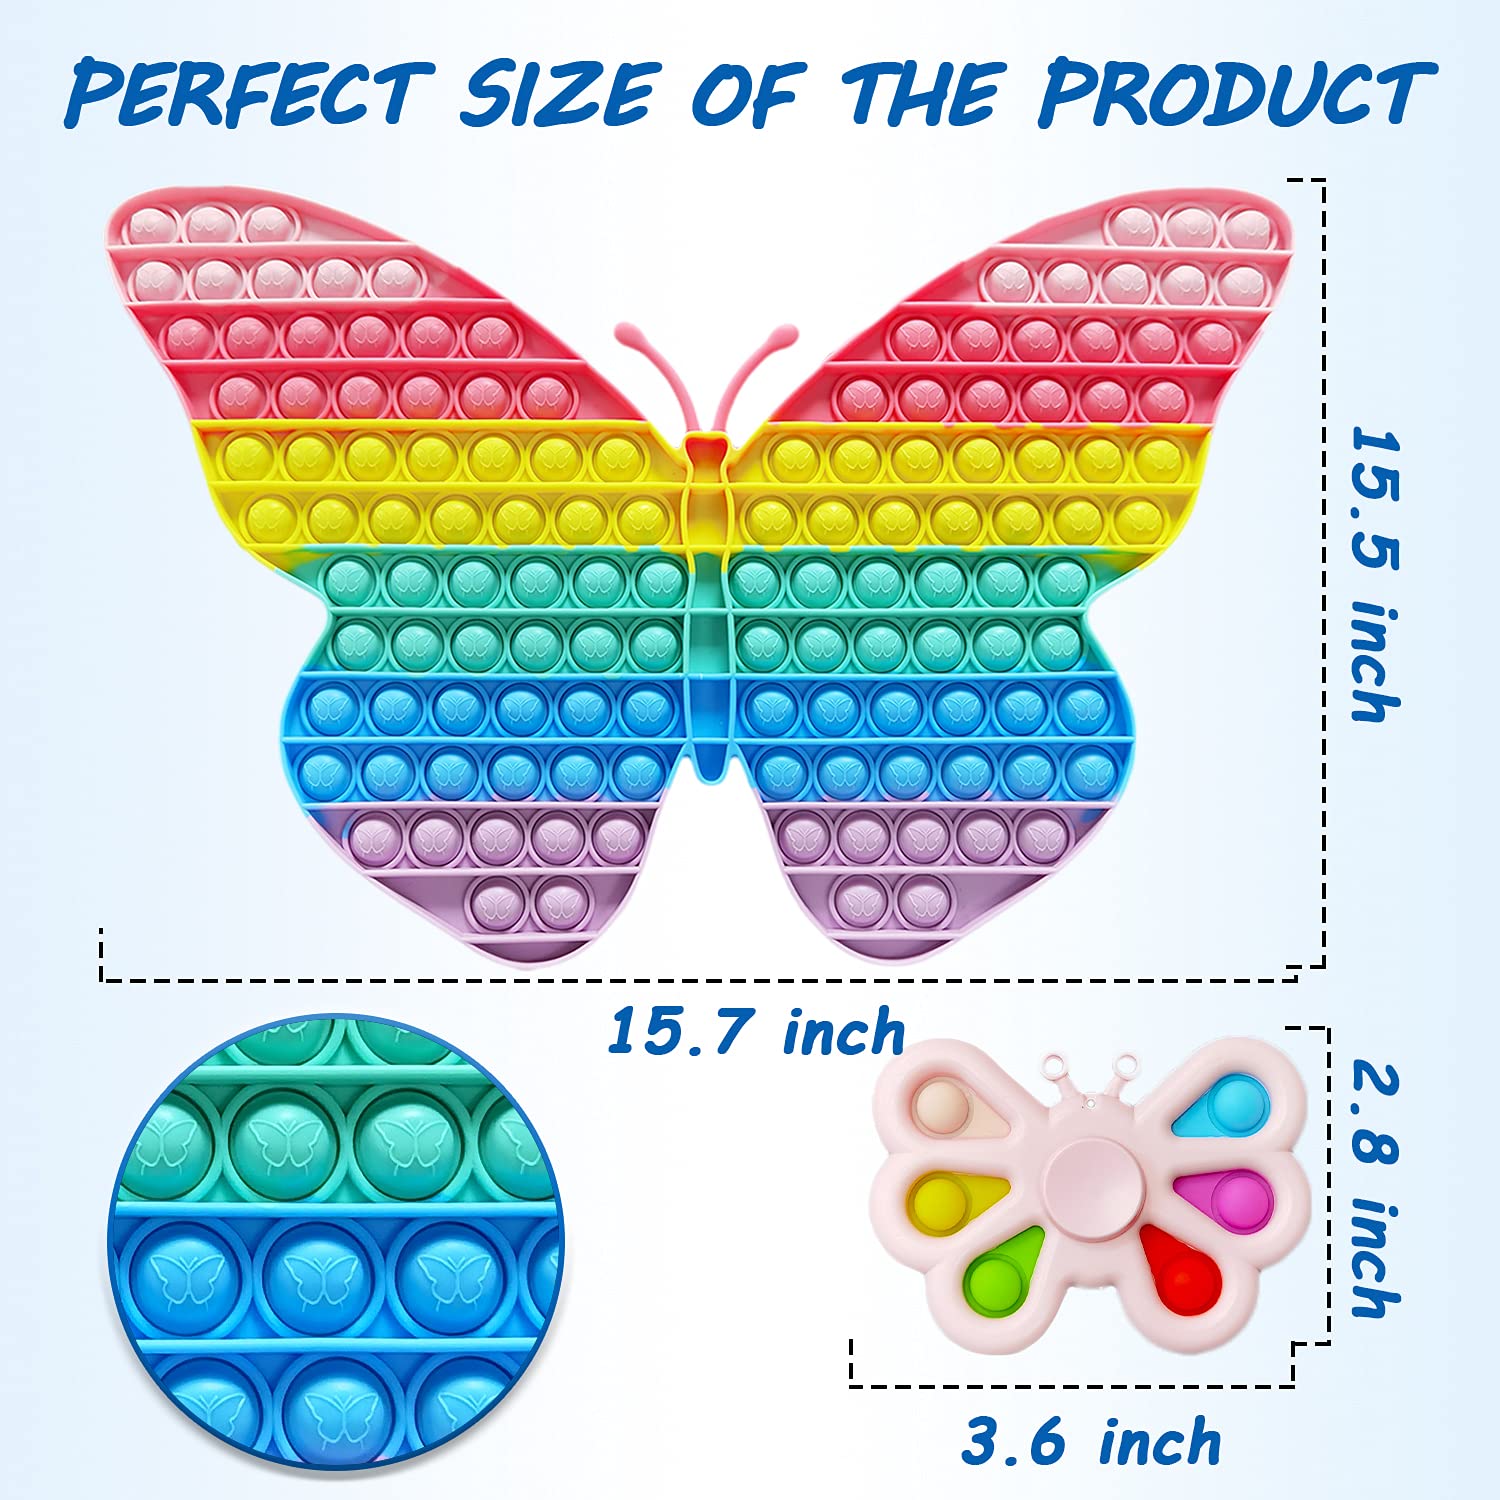 Giociiol 15.7 Inch, Jumbo Push Pop Fidget Packs, Big Size Butterfly Pop Fidget Toy, Rainbow Simple Dimple Fidget Toy, Large Super Big Huge Pop Pops it Anti-Anxiety Tool for Kids and Adult (2PCS)